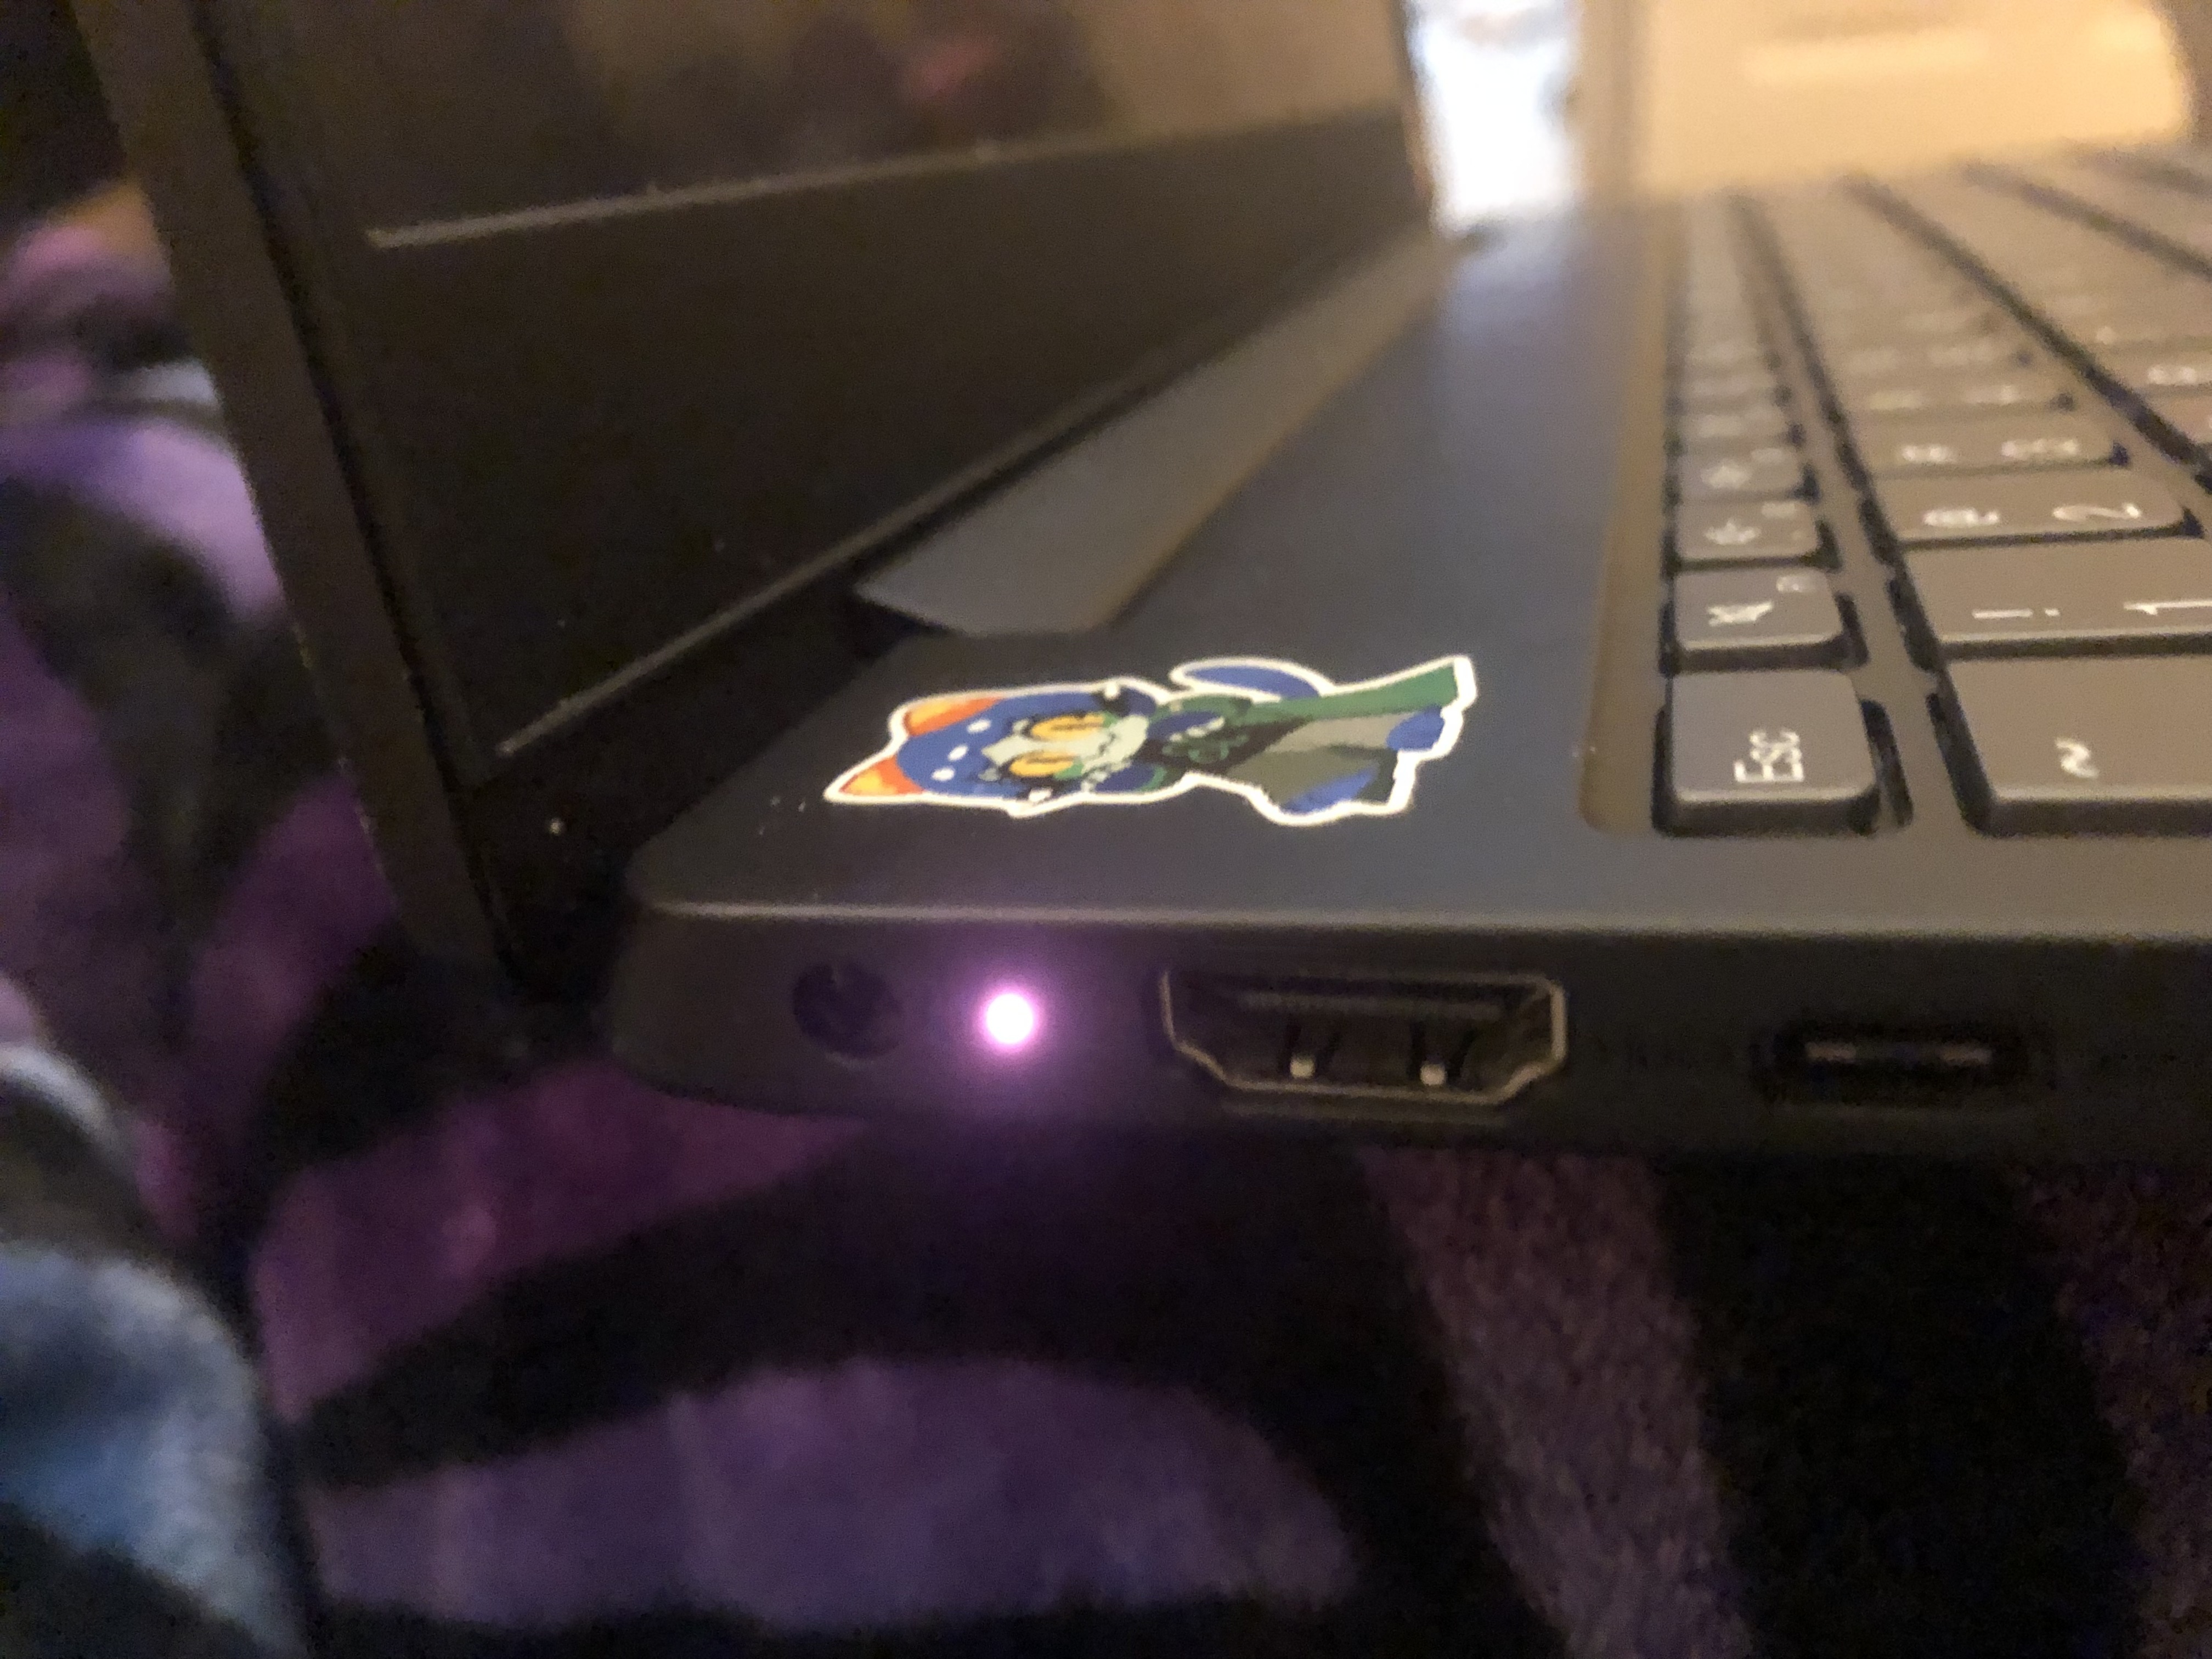 Lenovo ideapad gaming 3 power button blinking, power on but screen